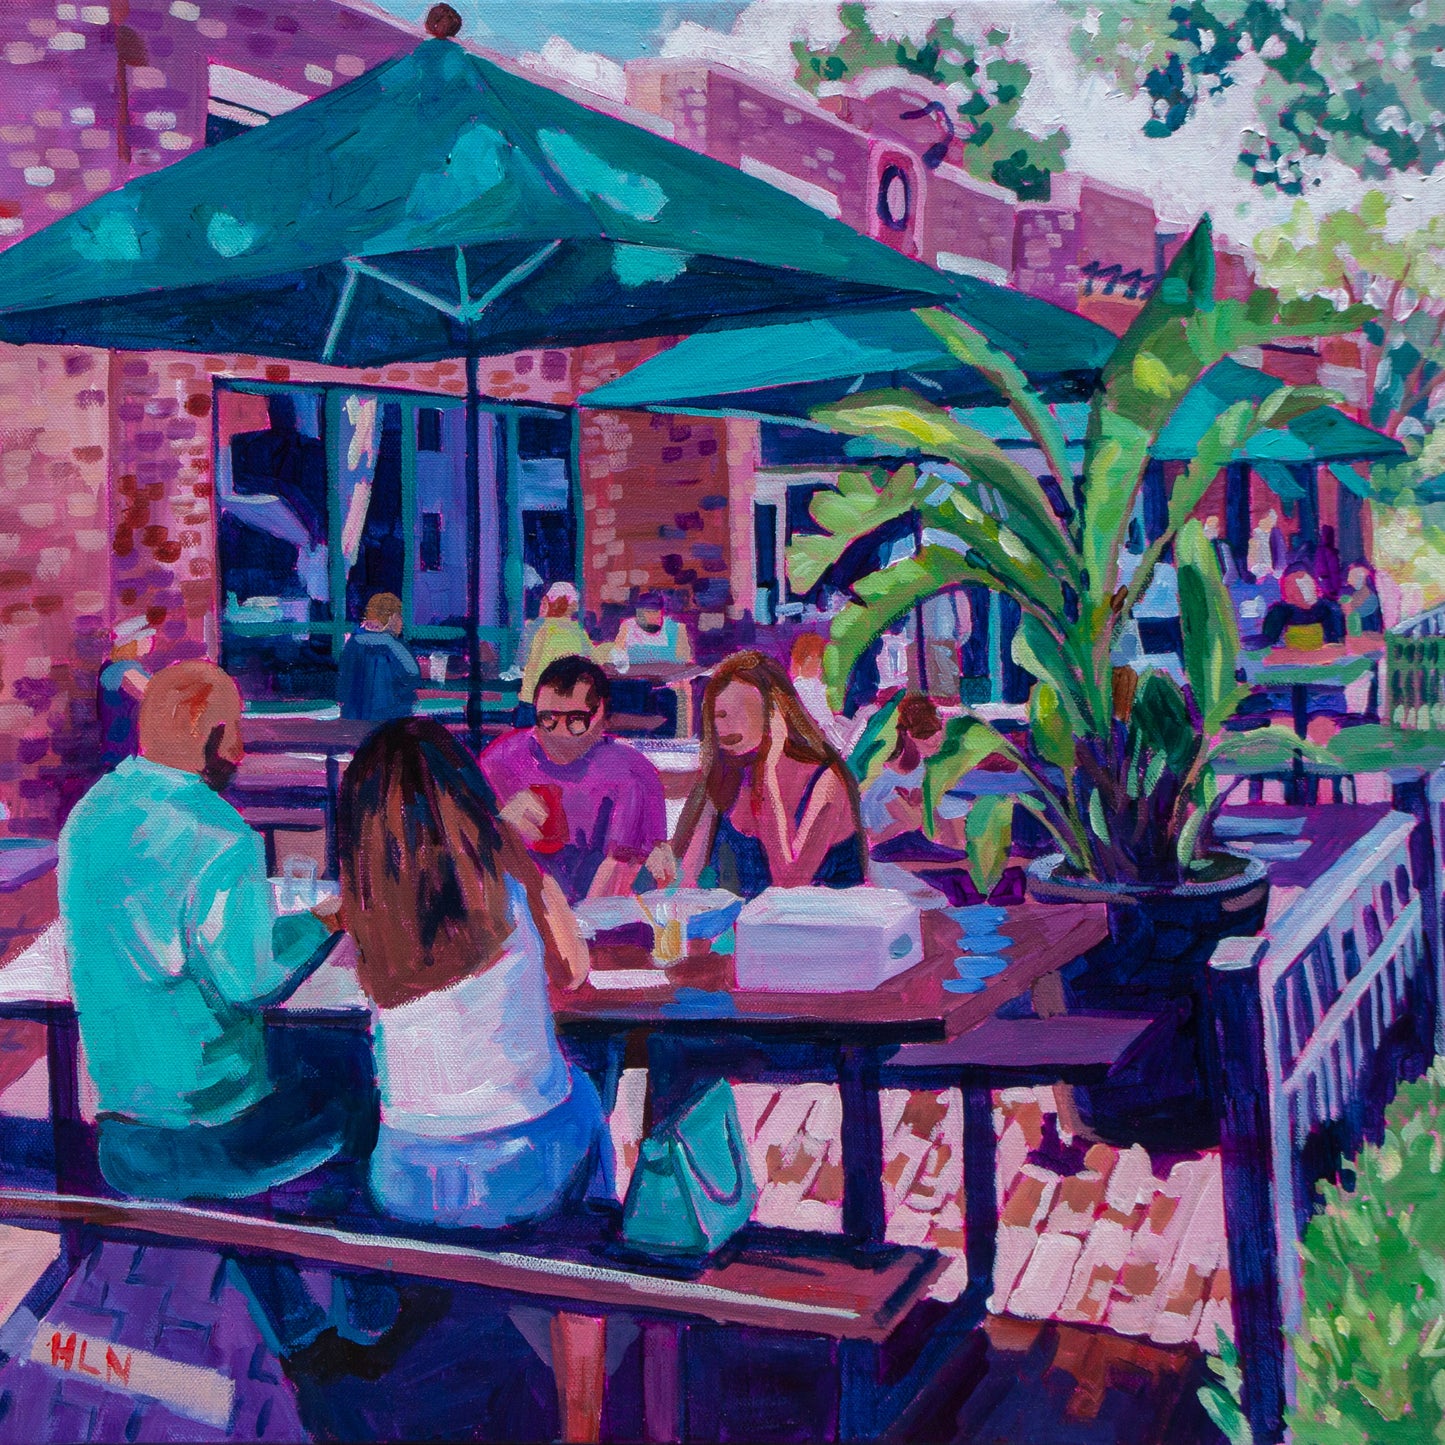 Impressionist painting of people at ourdoor cafe of Plant Street Market in Winter Garden Florida near the Crooked can brewery with  umbrellas 